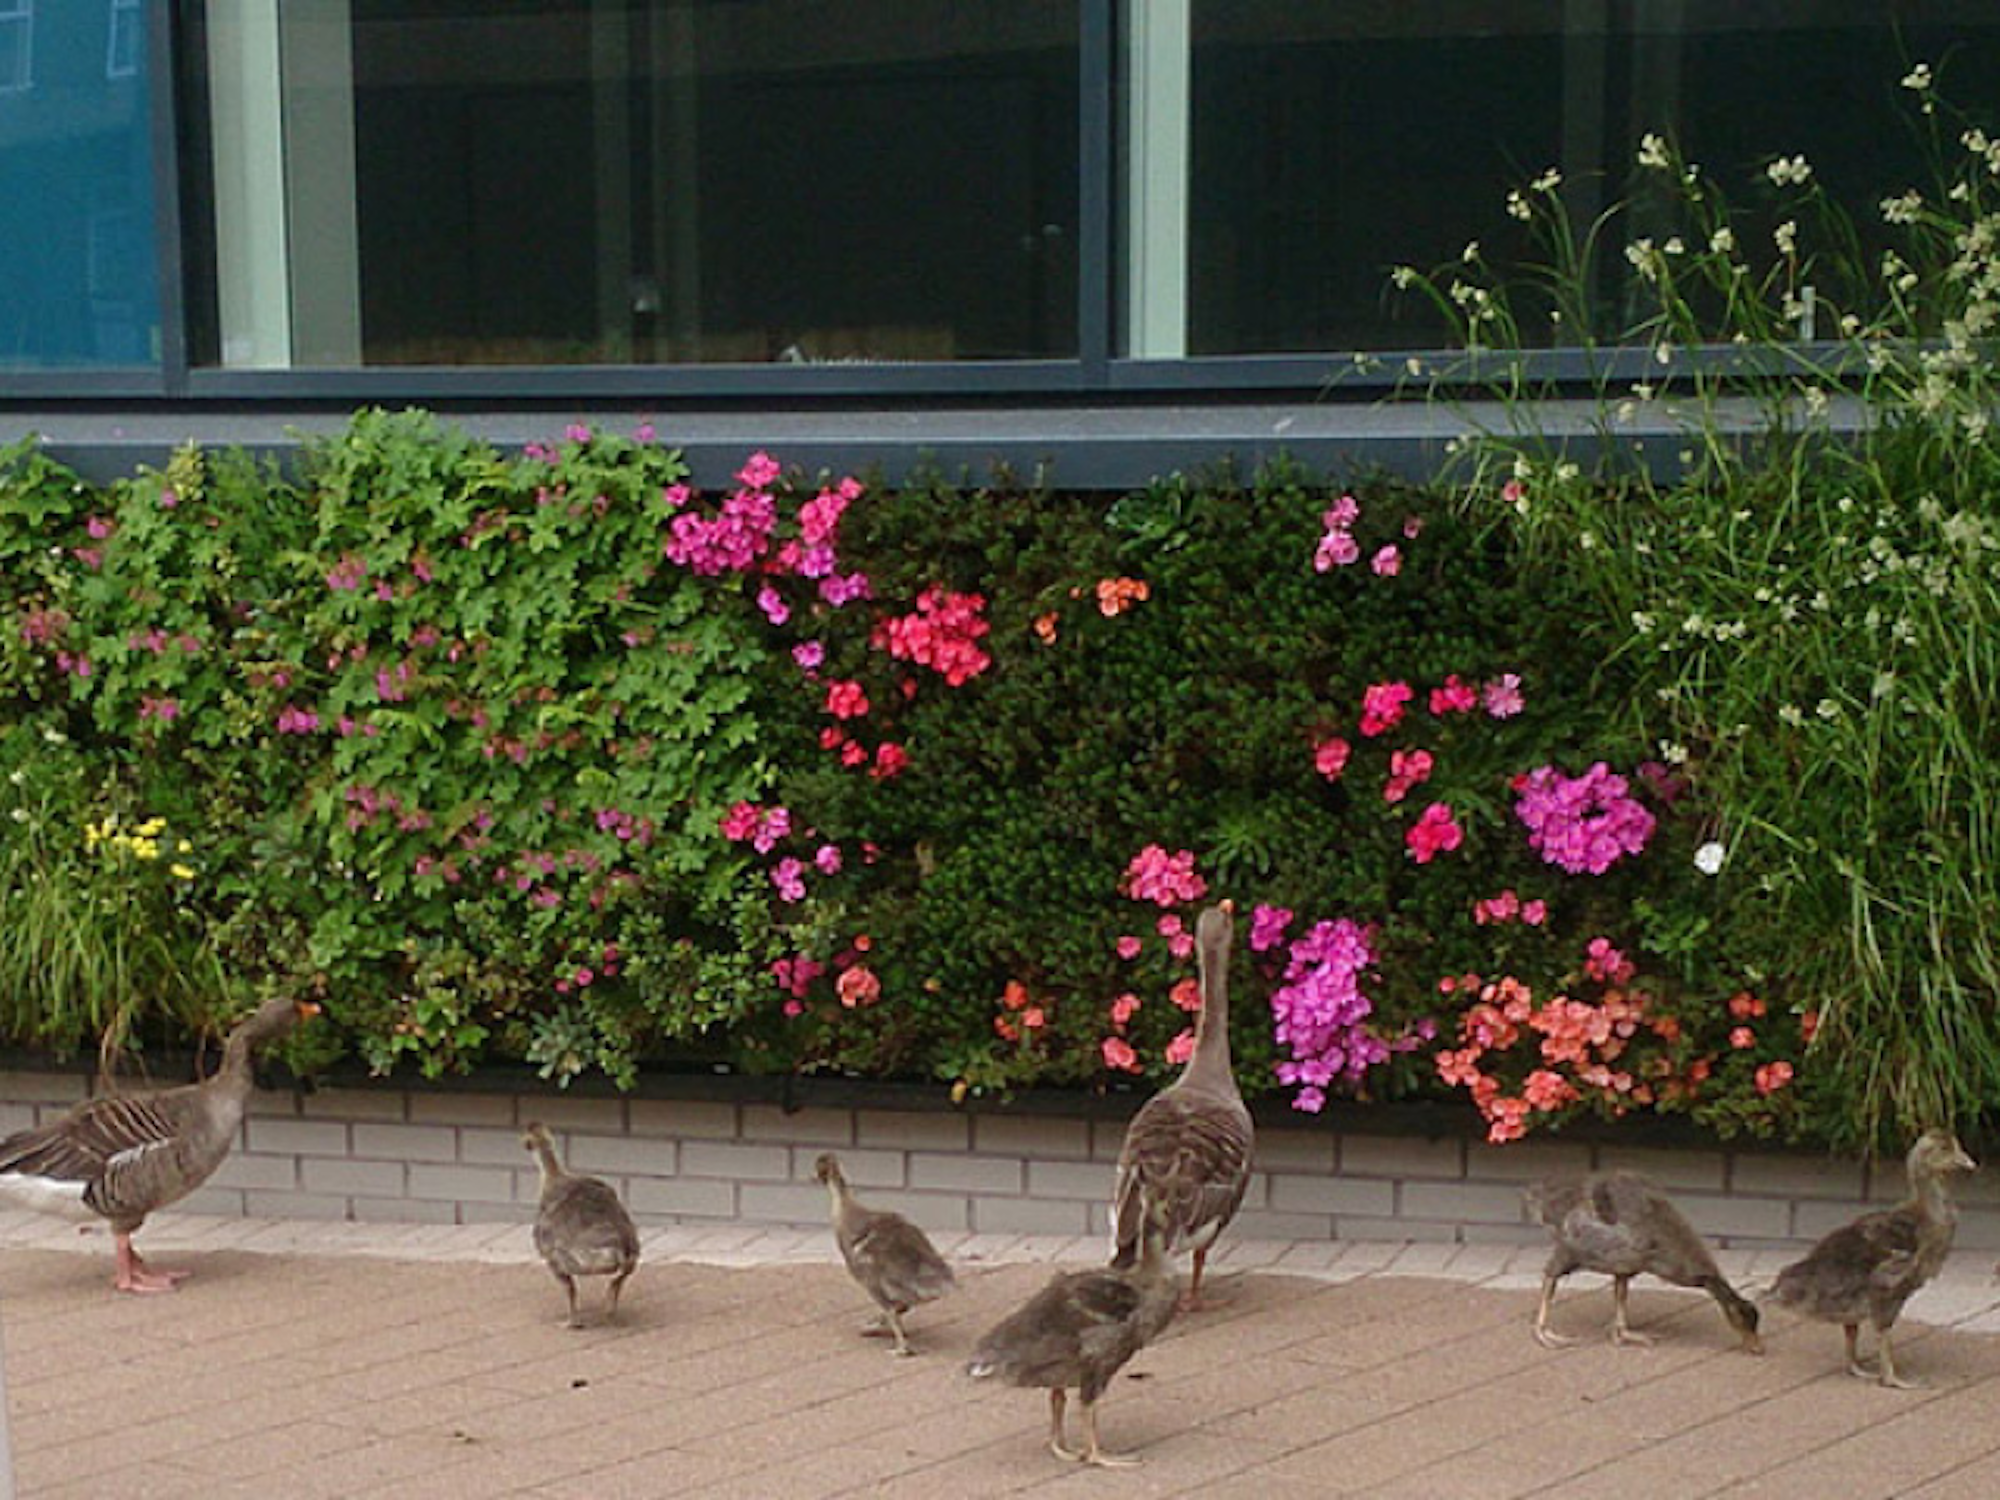 Ducks At University of York Biodiverse Living Wall With Pink Flowers